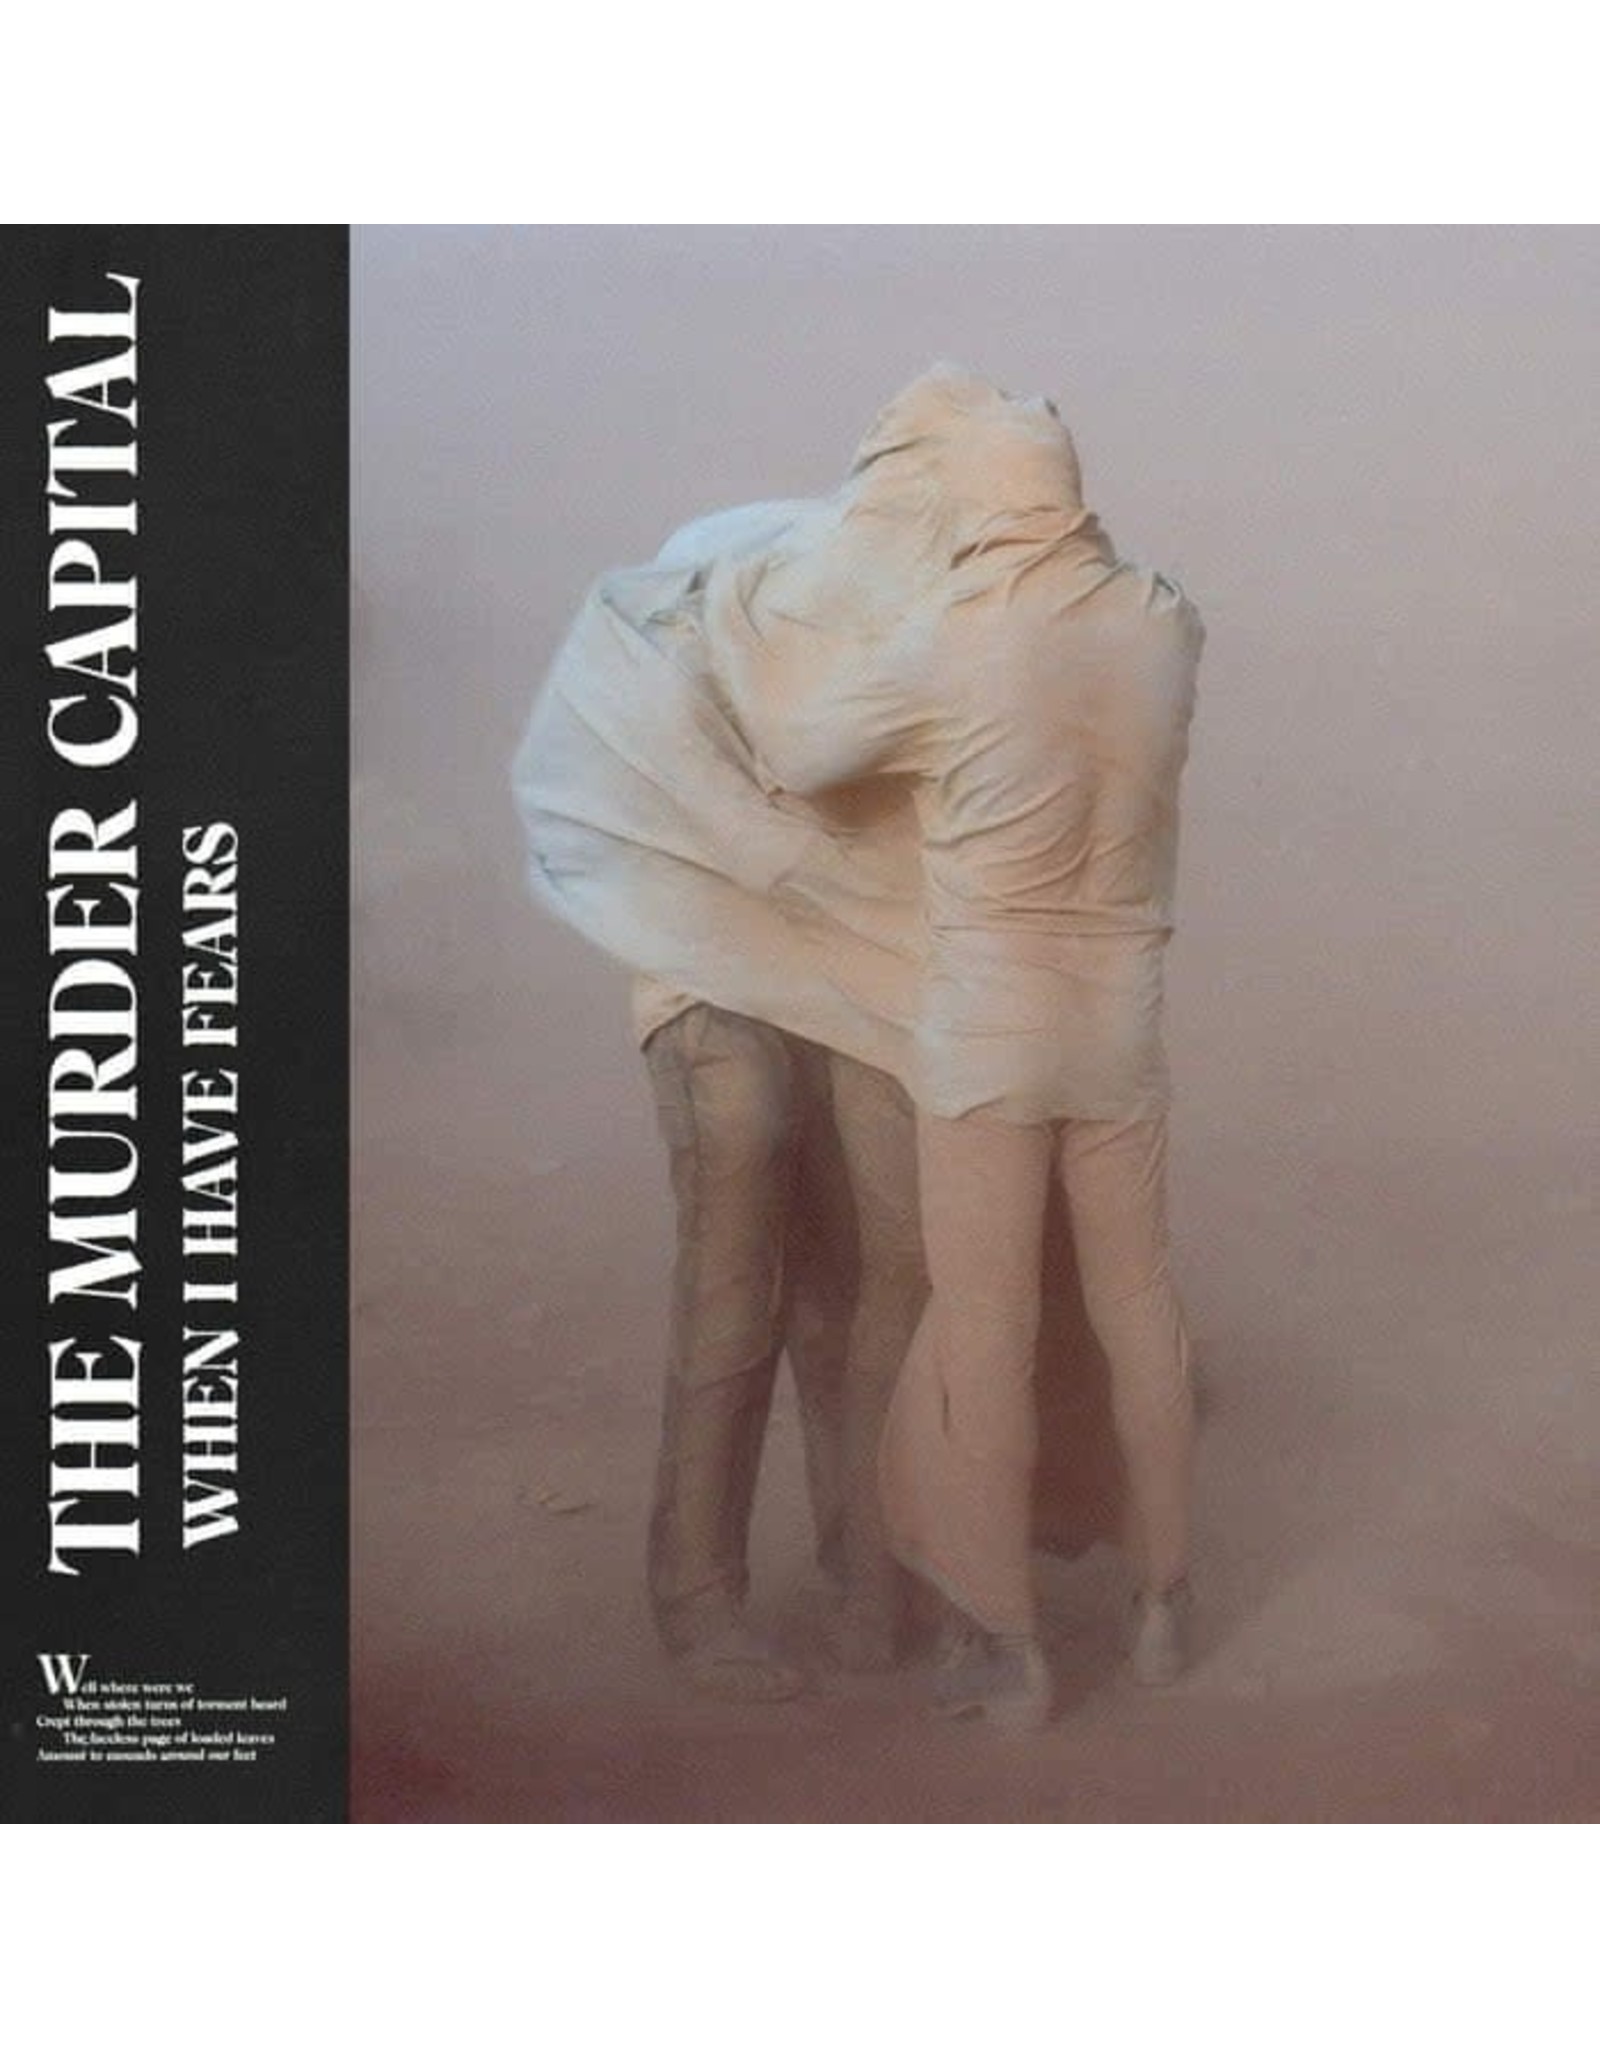 Murder Capital - When I Have Fears LP